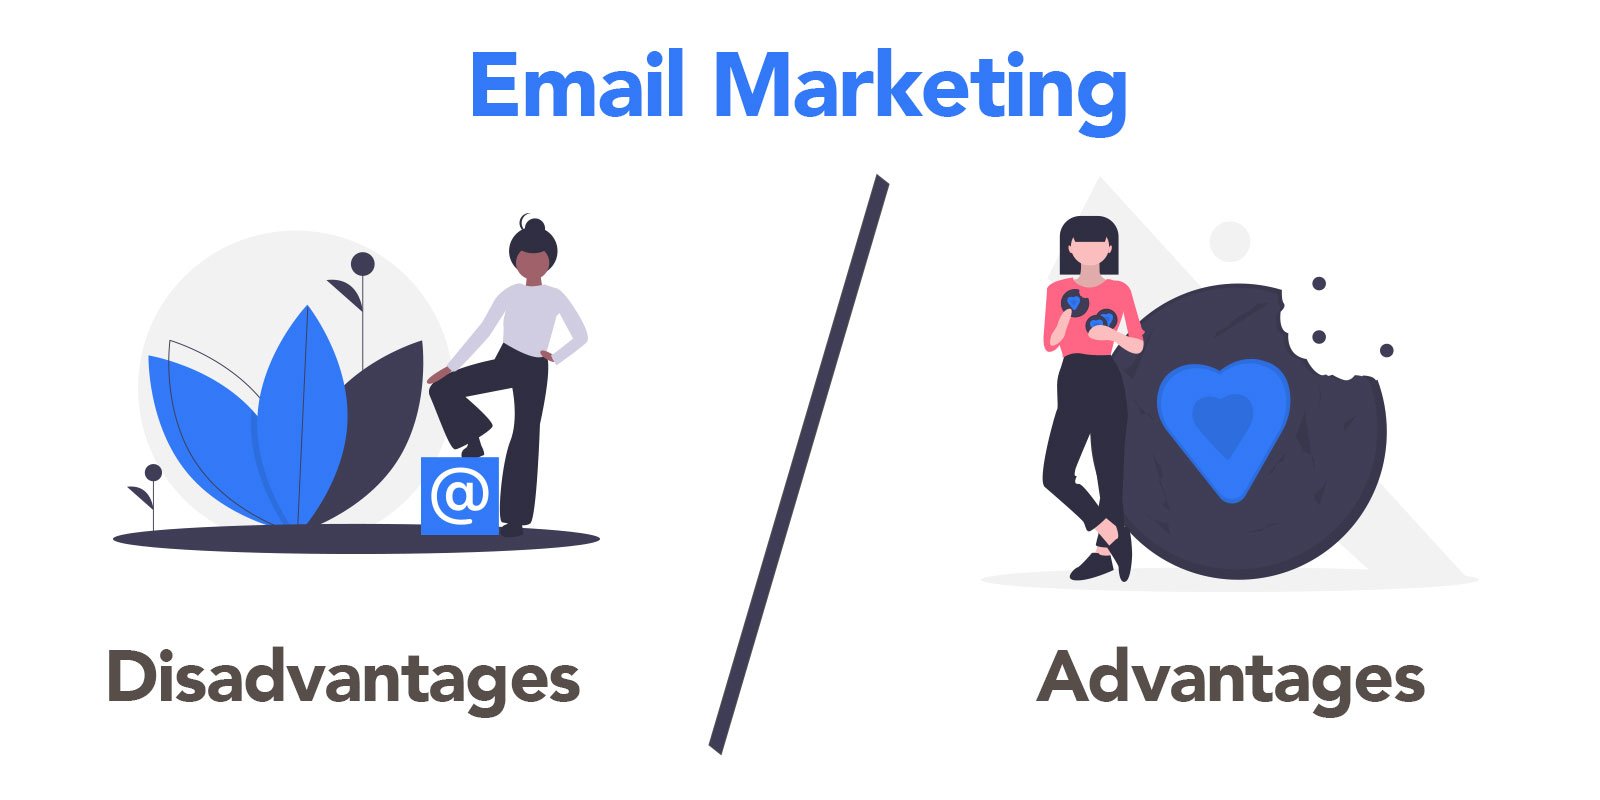 Some Advantages and Disadvantages of Email Marketing